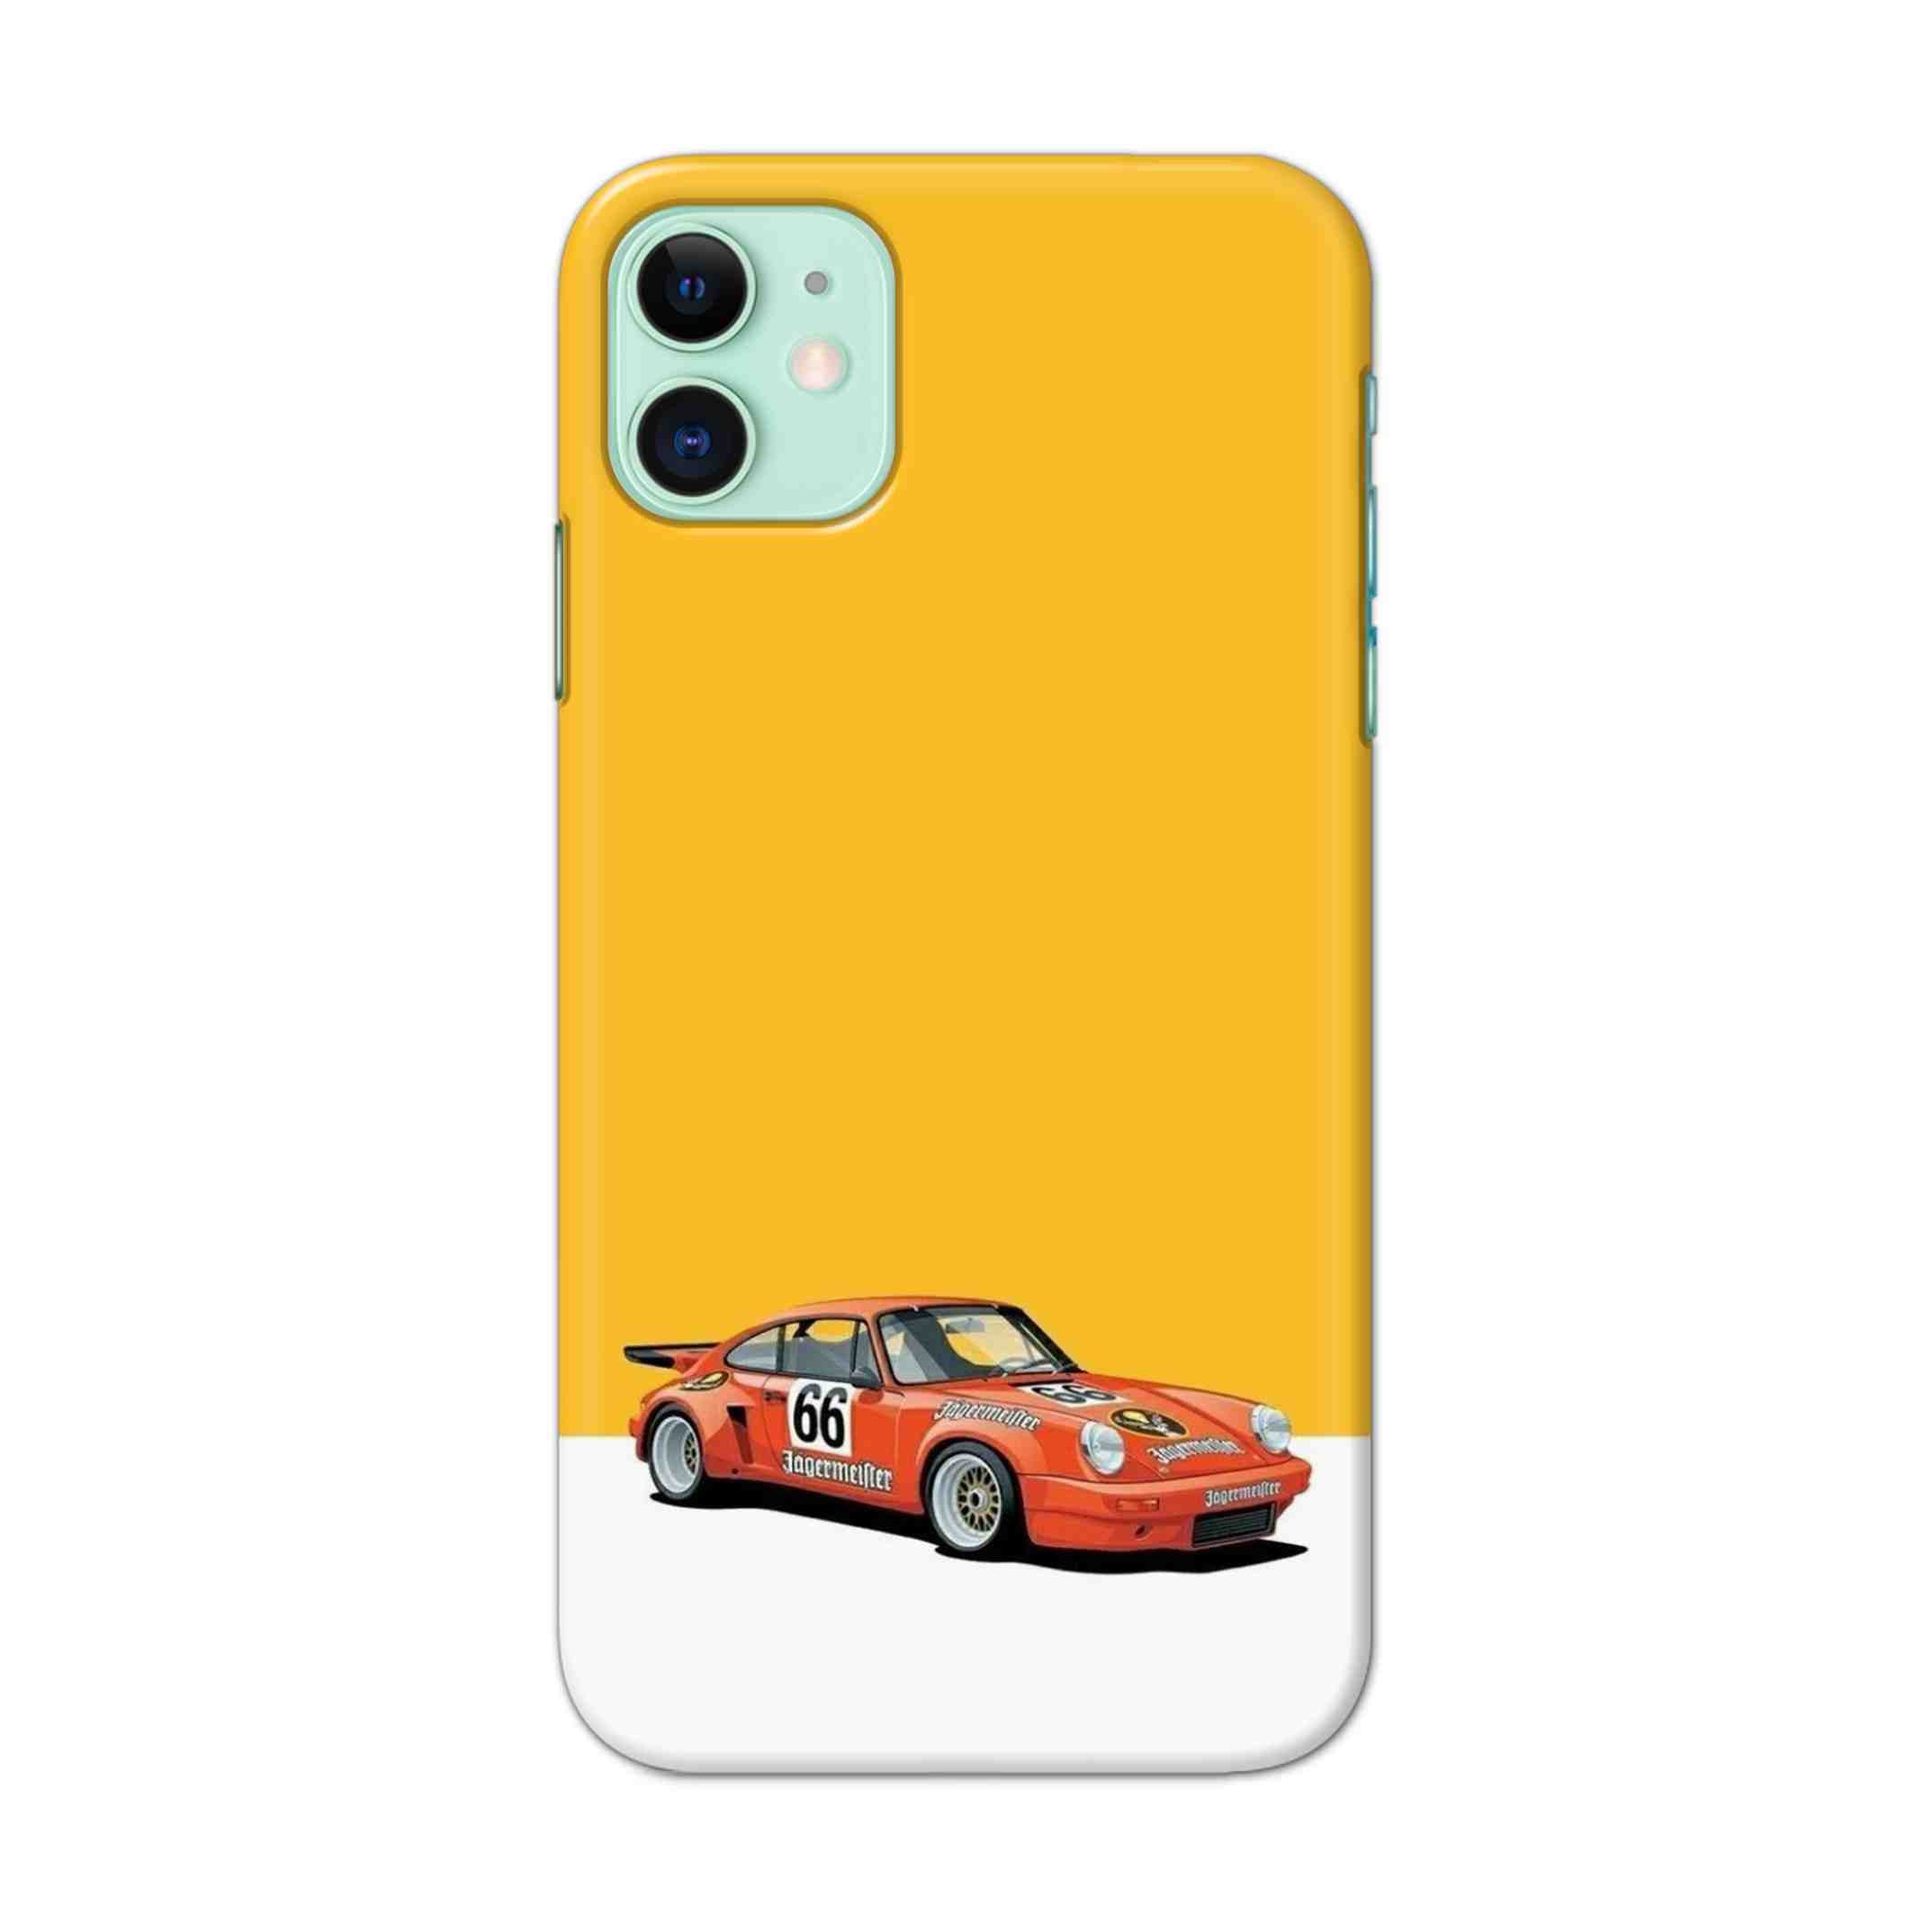 Buy Porche Hard Back Mobile Phone Case/Cover For iPhone 11 Online